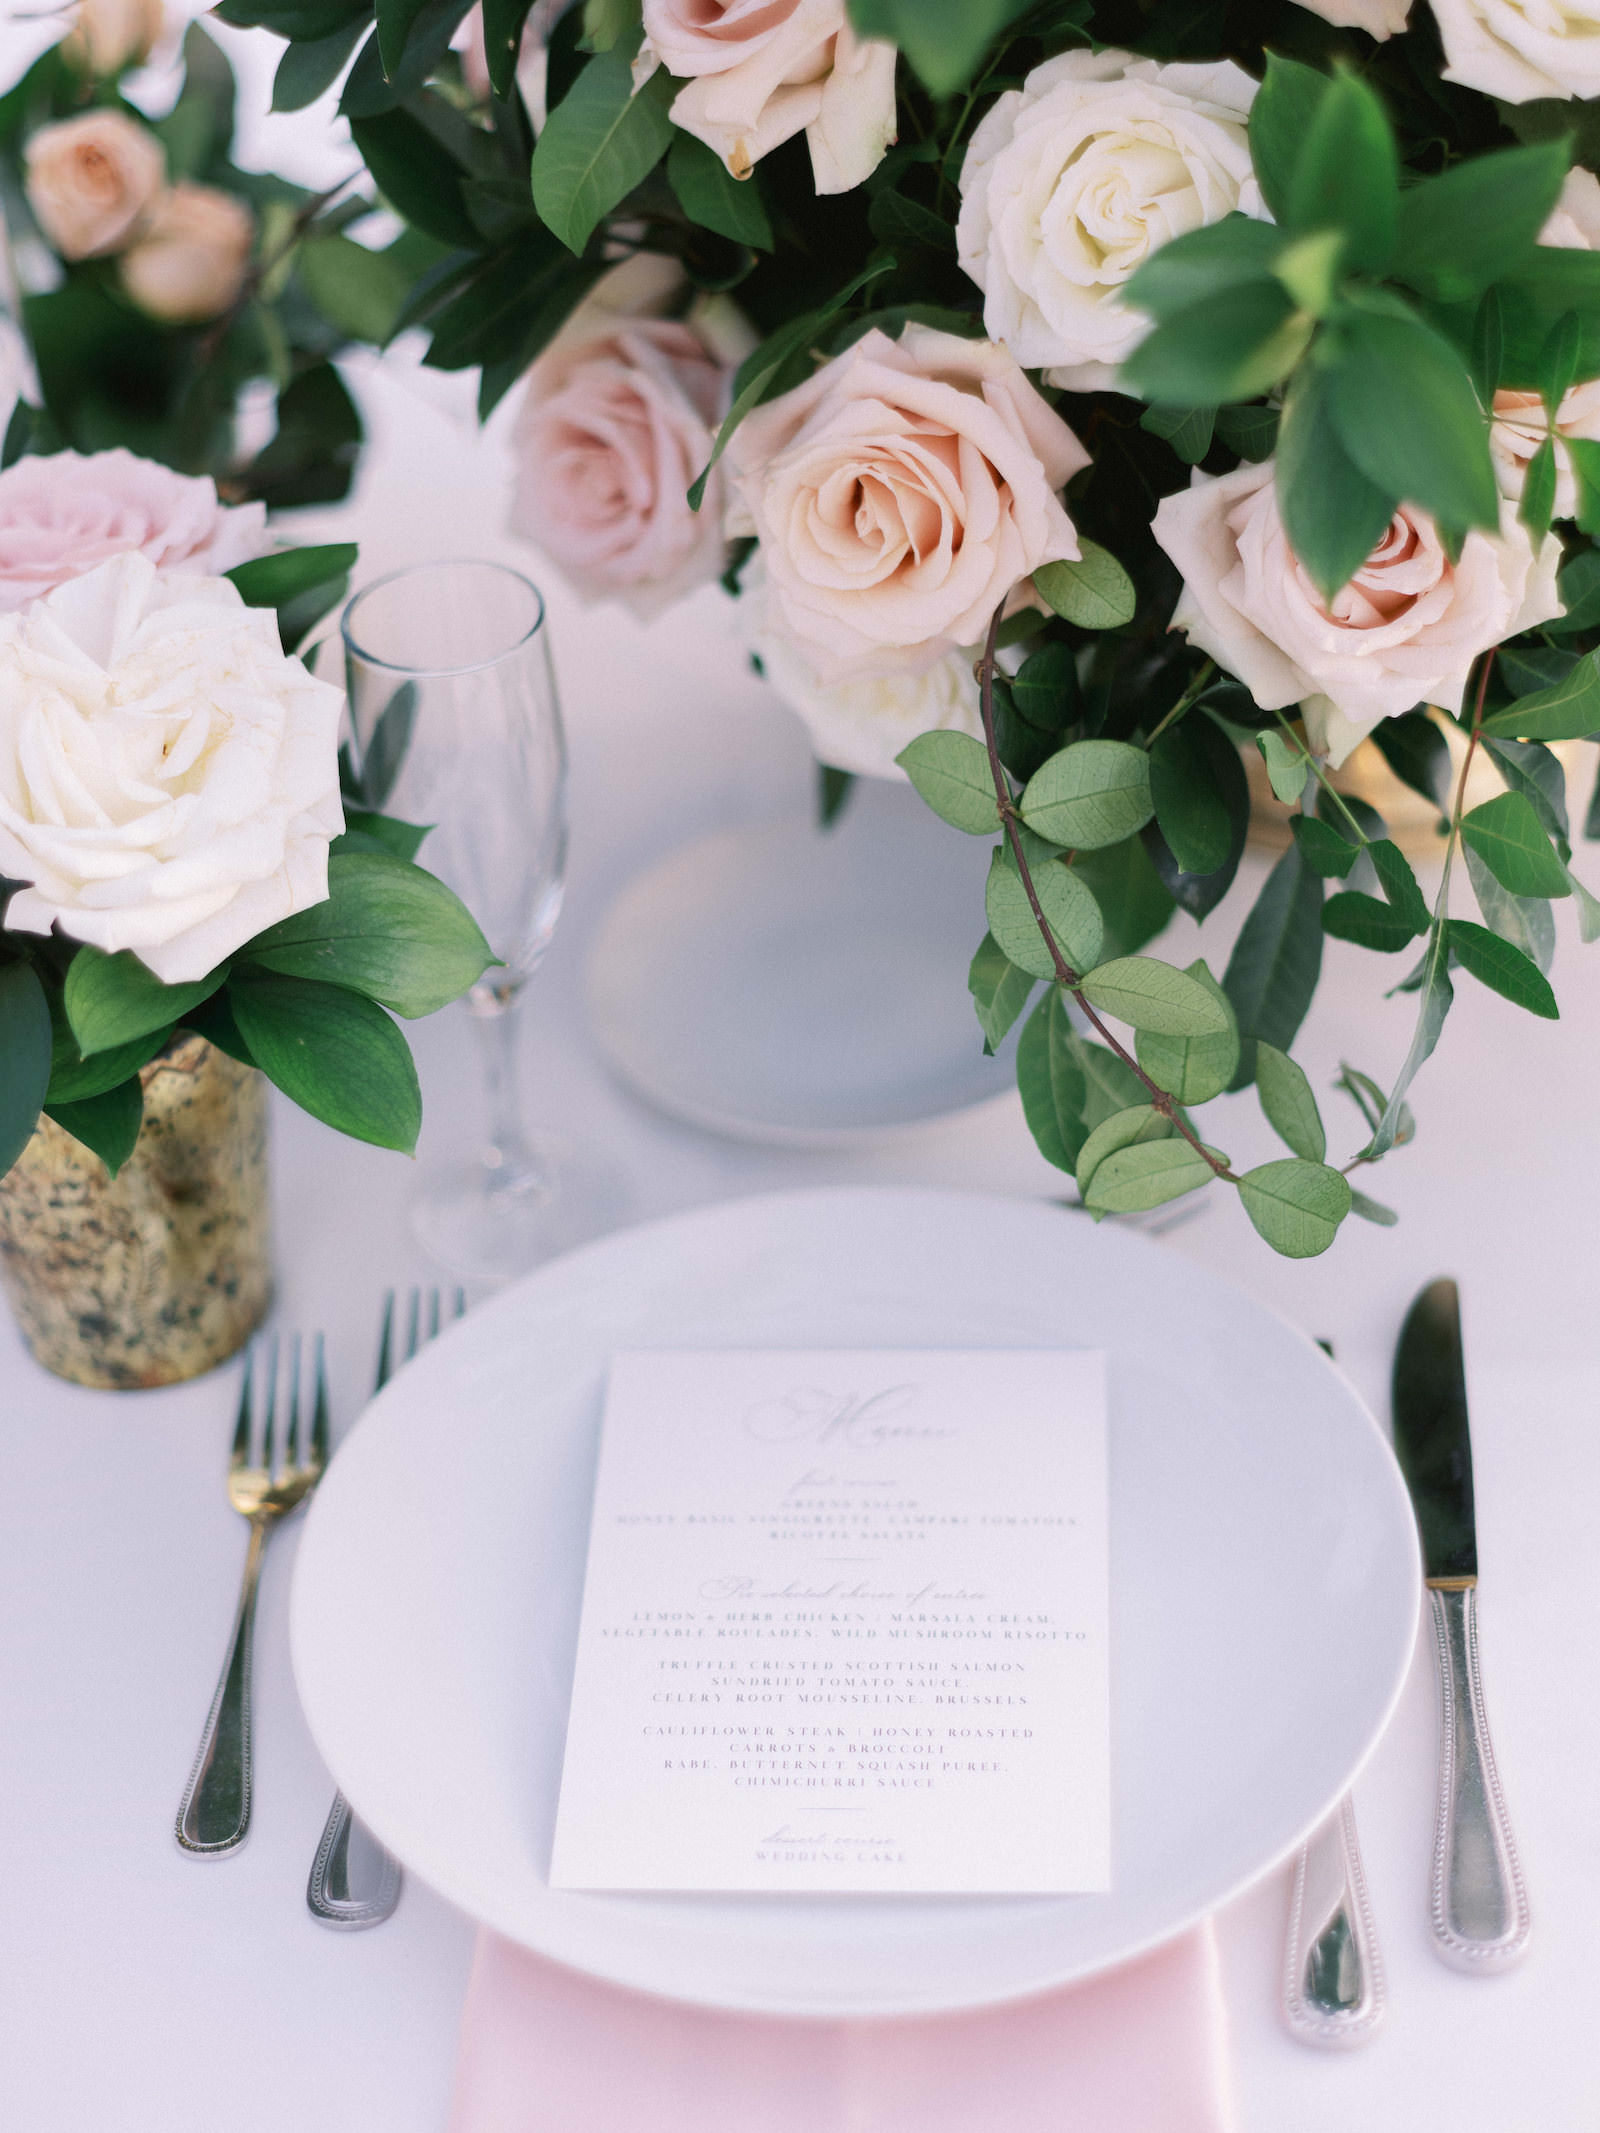 Romantic, Florida Wedding Pacesetting, Ivory Paper Menu, Floral Centerpiece with Blush Pink, and Ivory, Blush Pink Linens, Elegant Flatware | Florida Wedding Planner NK Weddings